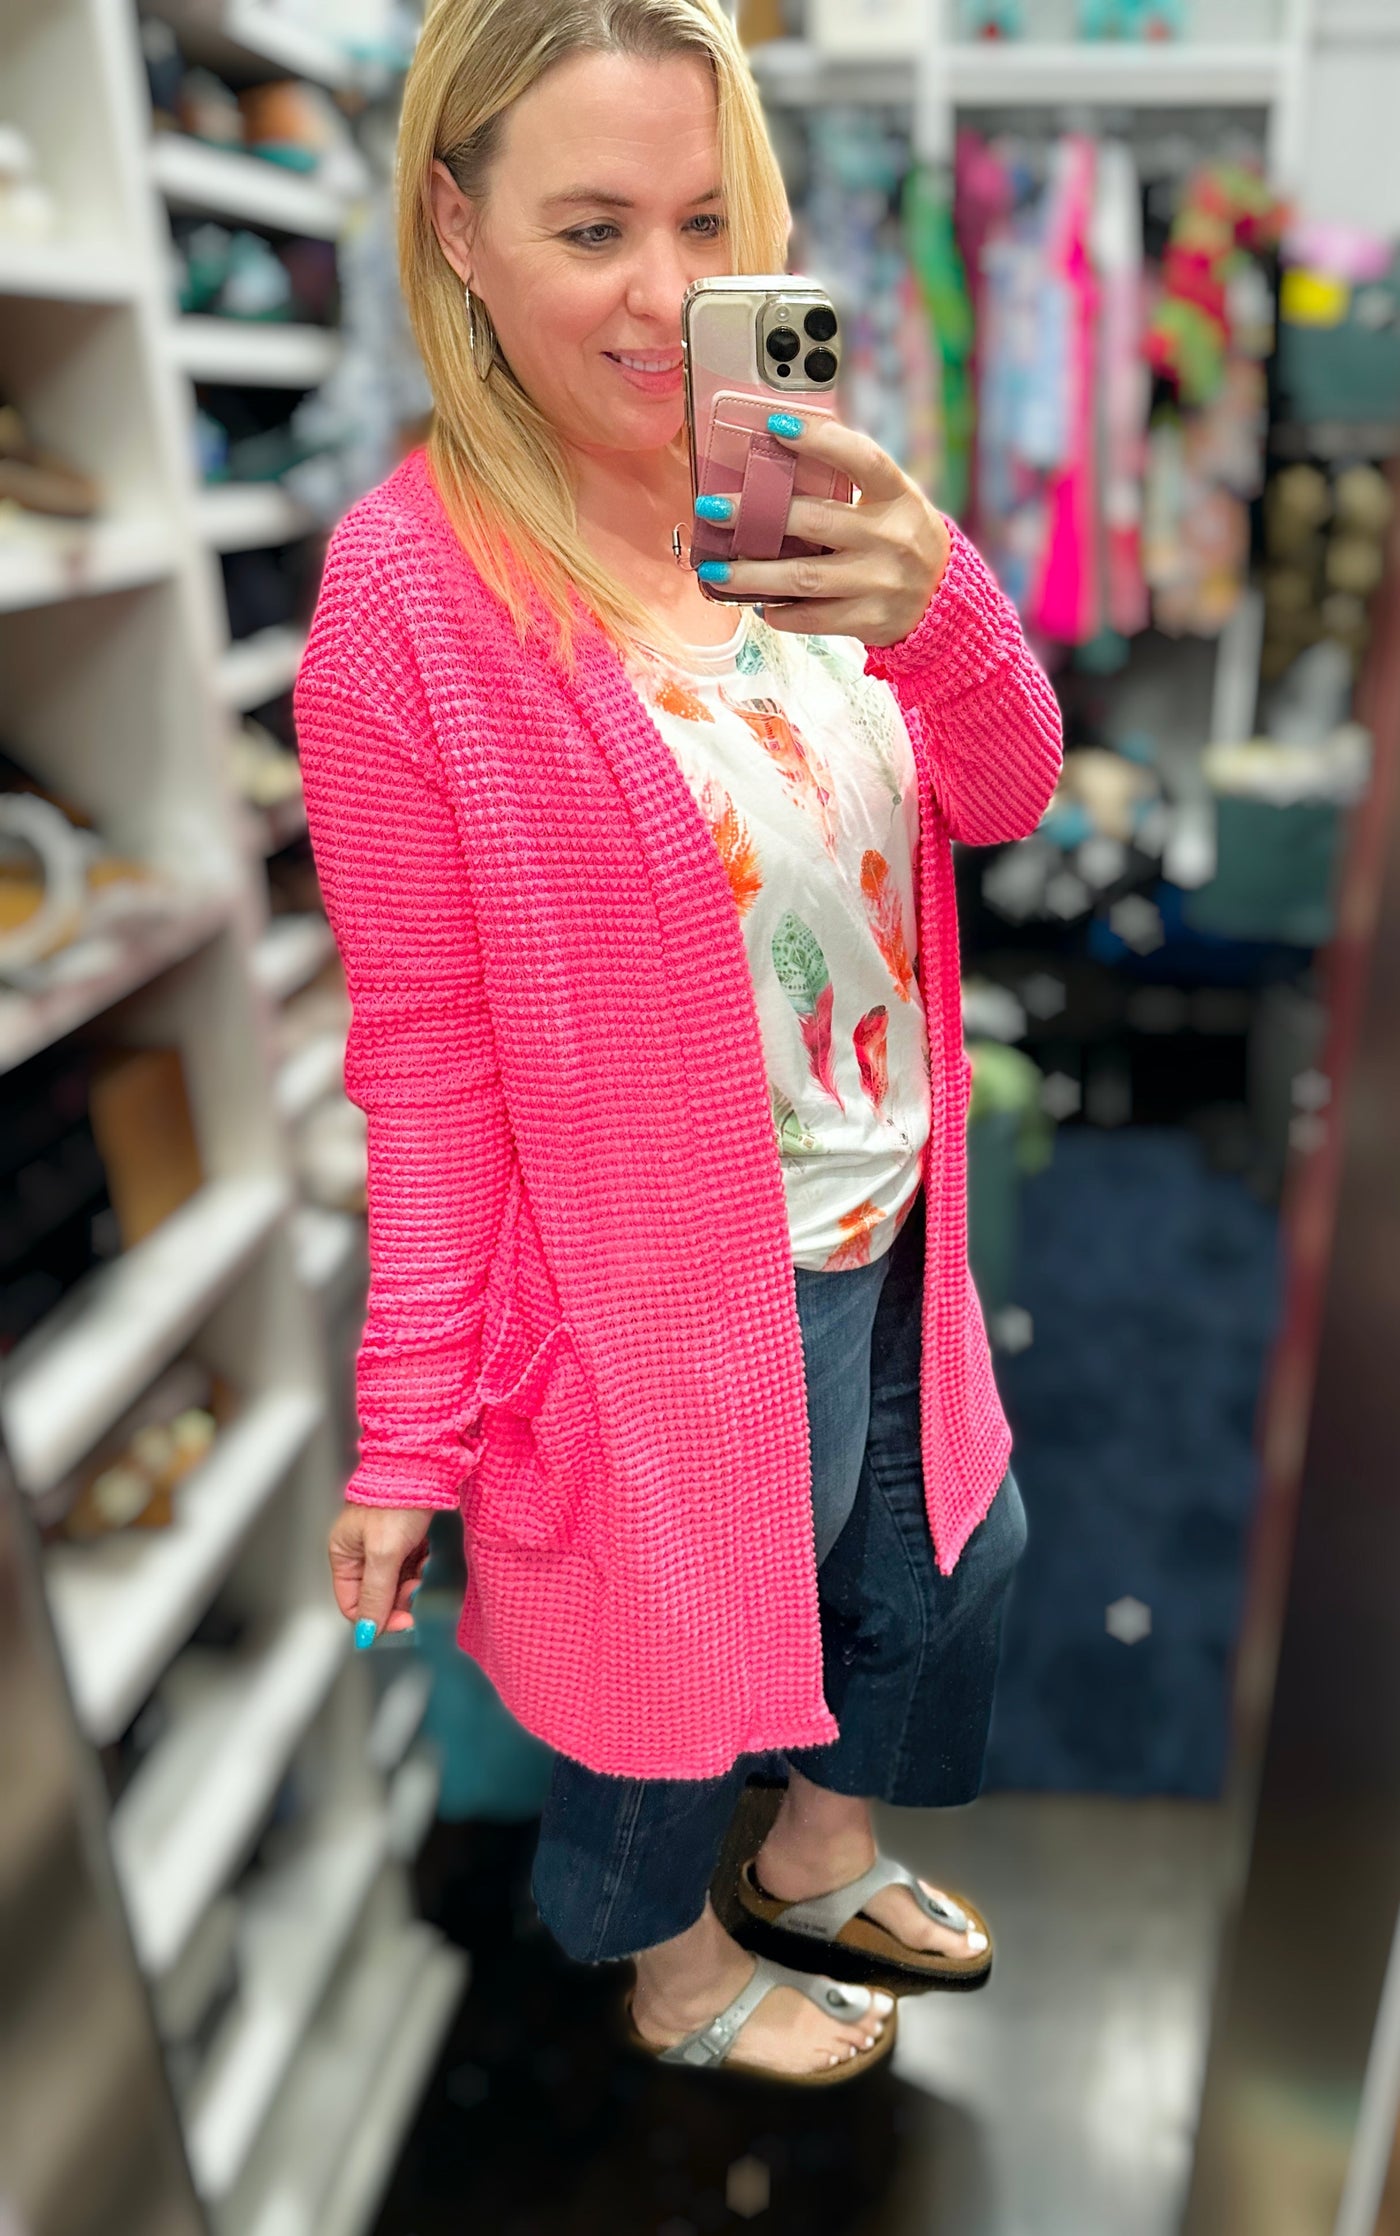 NEW SPRING COLORS ADDED! Lola Waffle Knit Cardigan - Blakeley